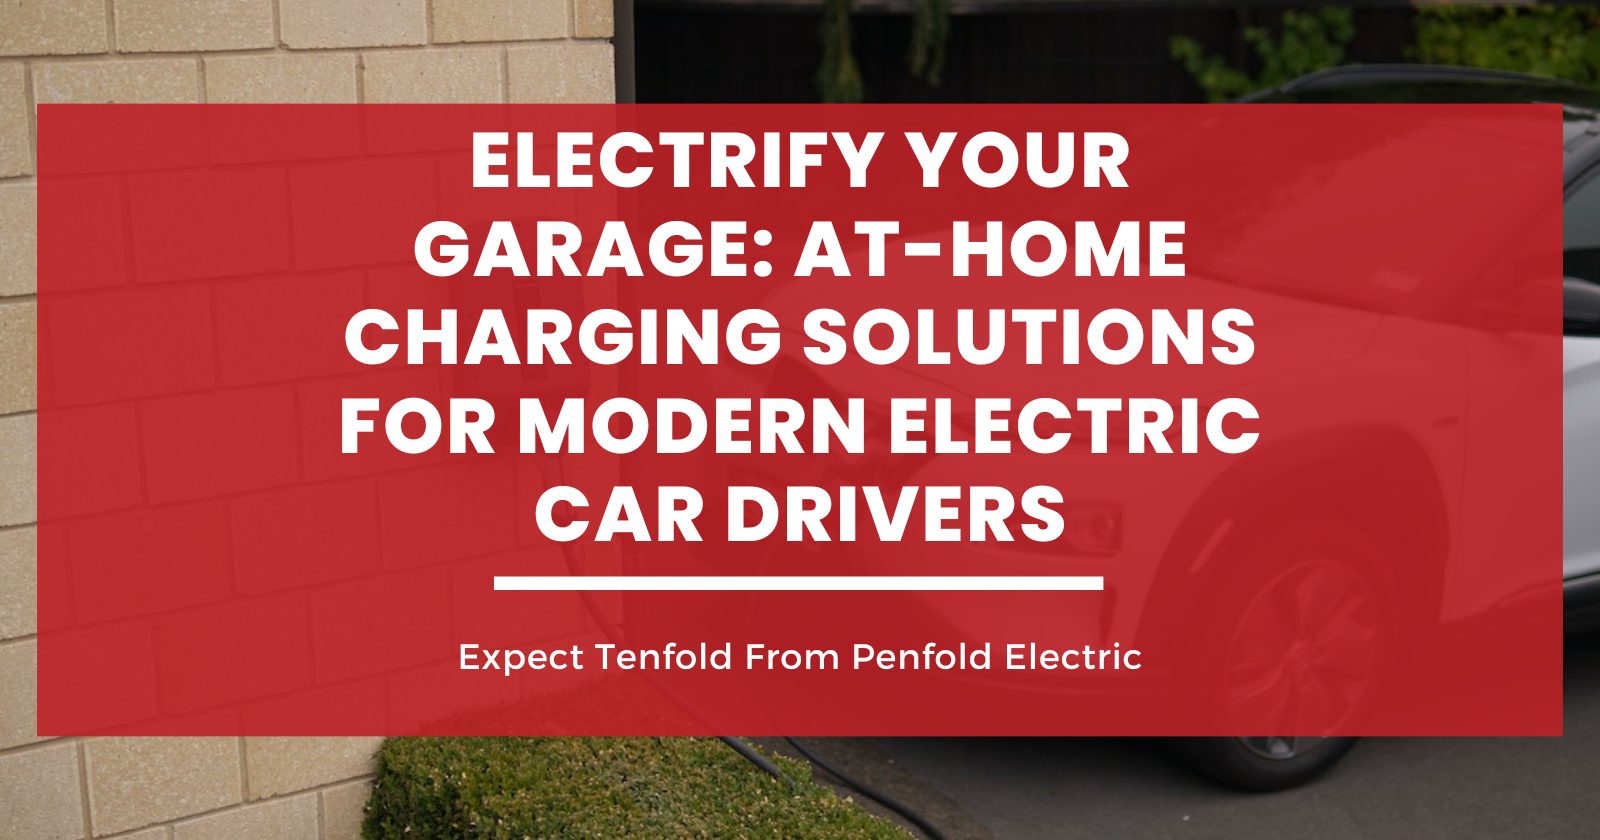 Electrify Your Garage: At-Home Charging Solutions for Modern Electric Car Drivers